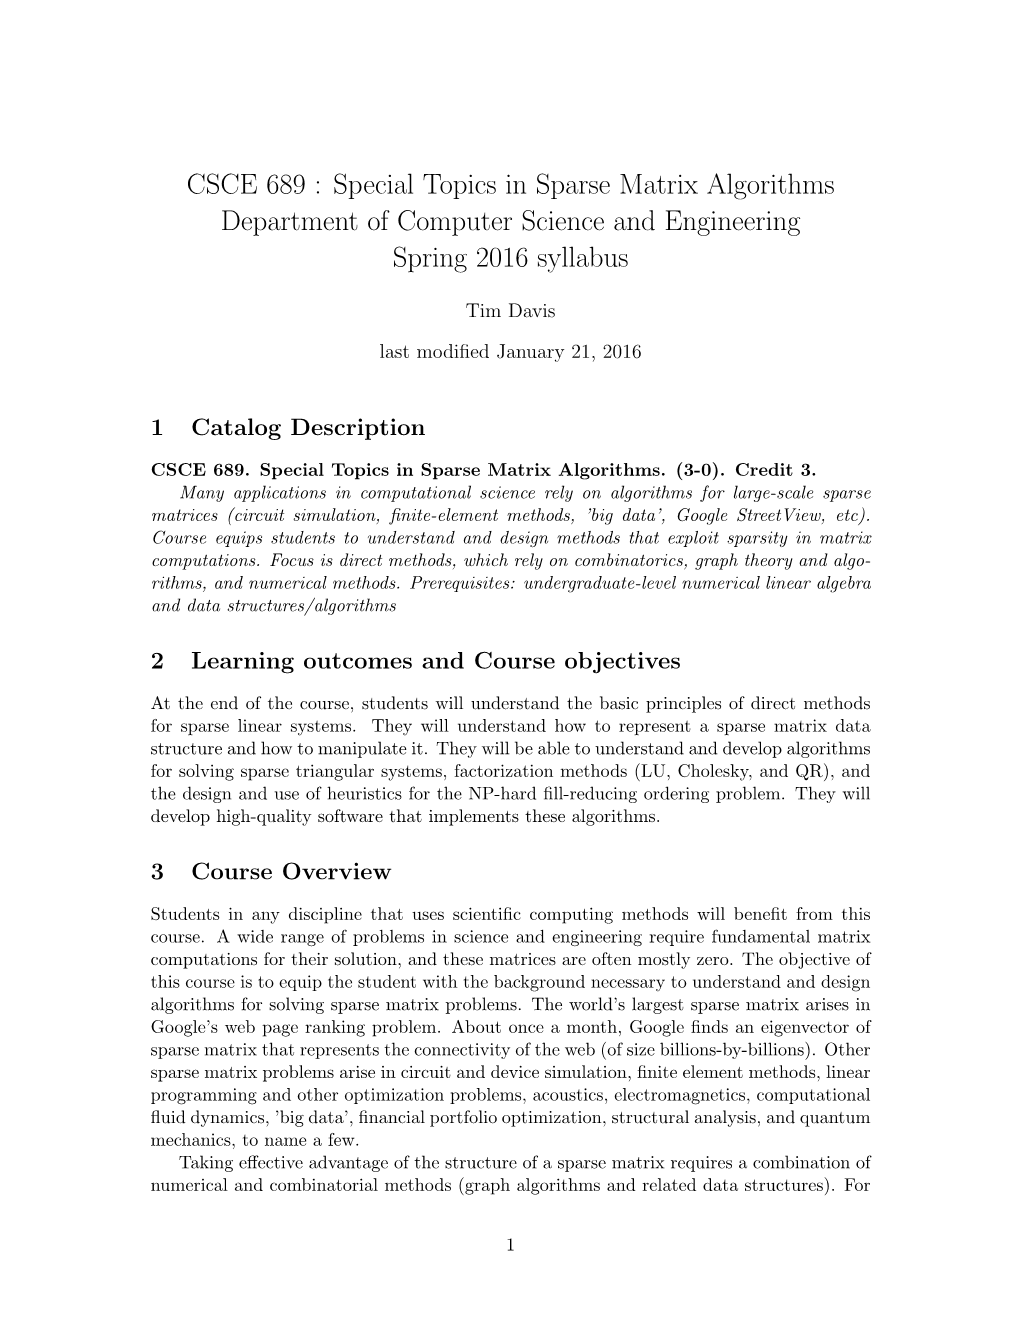 Special Topics in Sparse Matrix Algorithms Department of Computer Science and Engineering Spring 2016 Syllabus